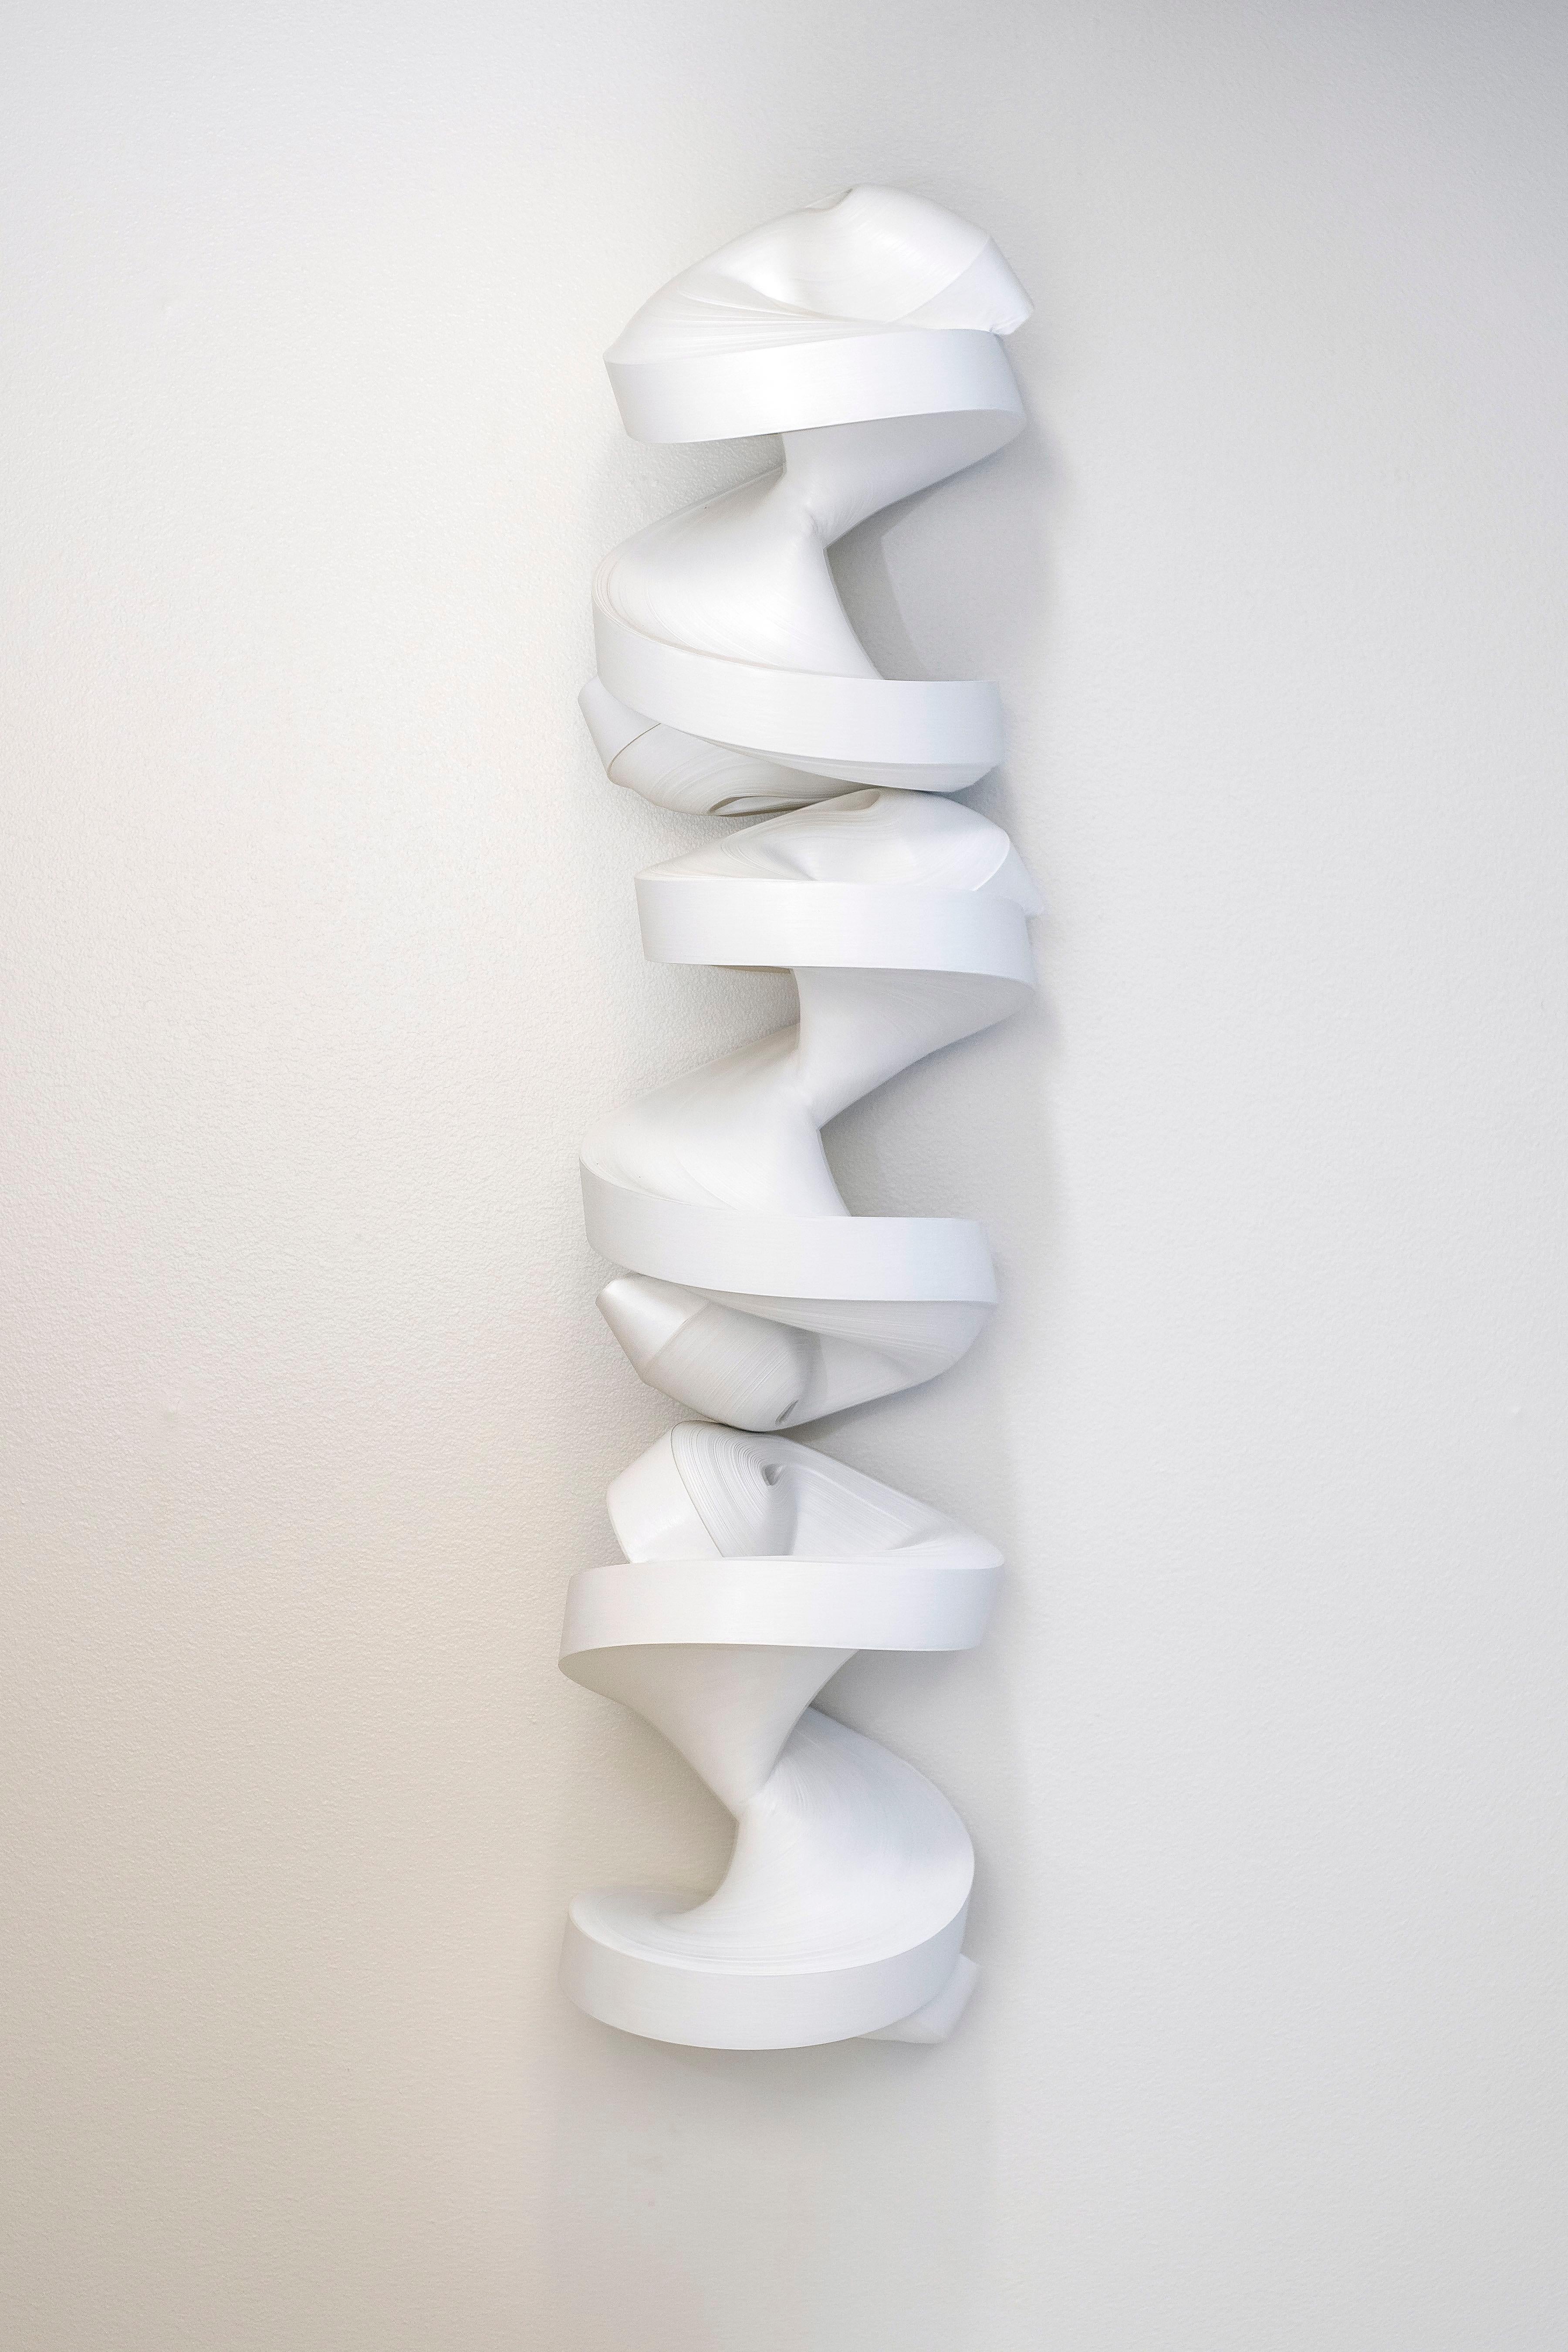 This sculpture exemplifies Jae Ko's unique medium of rolled paper and ink in a classic and sophisticated white.  She had a major solo exhibition of rolled white paper taking up an entire floor at the Contemporary Arts Museum Houston (CAMH) in 2016.